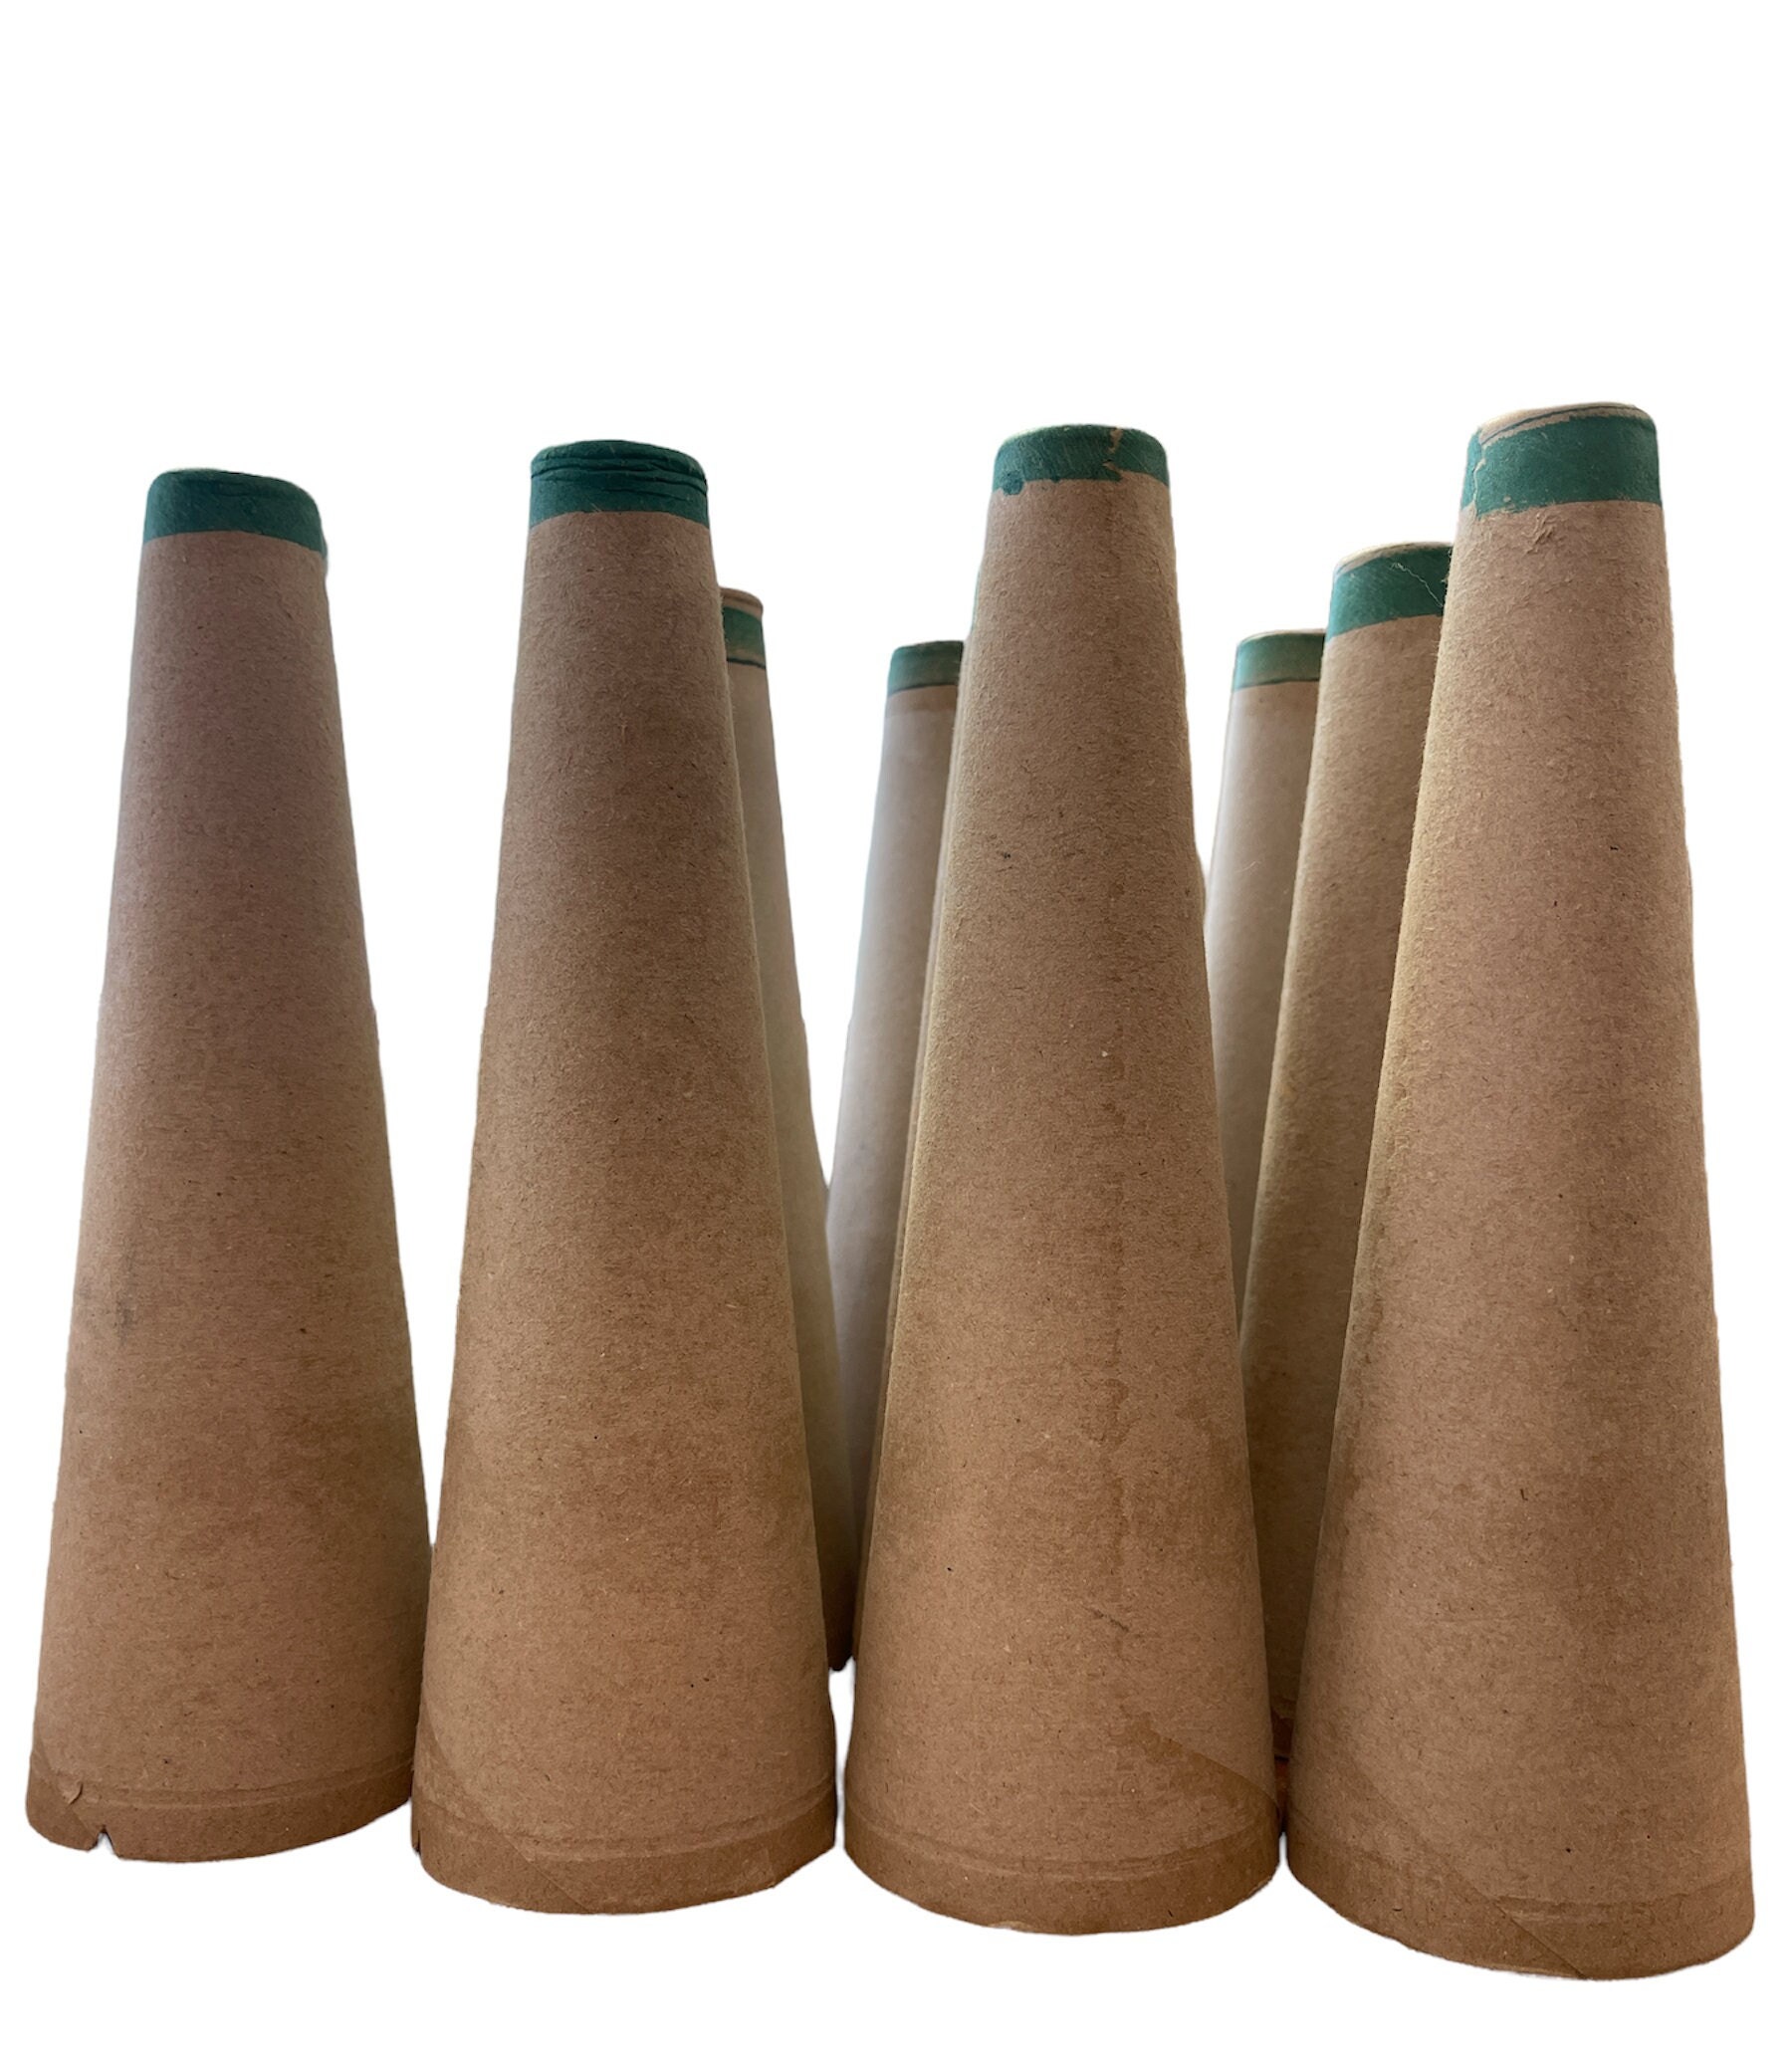 10 Cardboard Cones for Crafts Winding Yarn Lot of 10 Works 